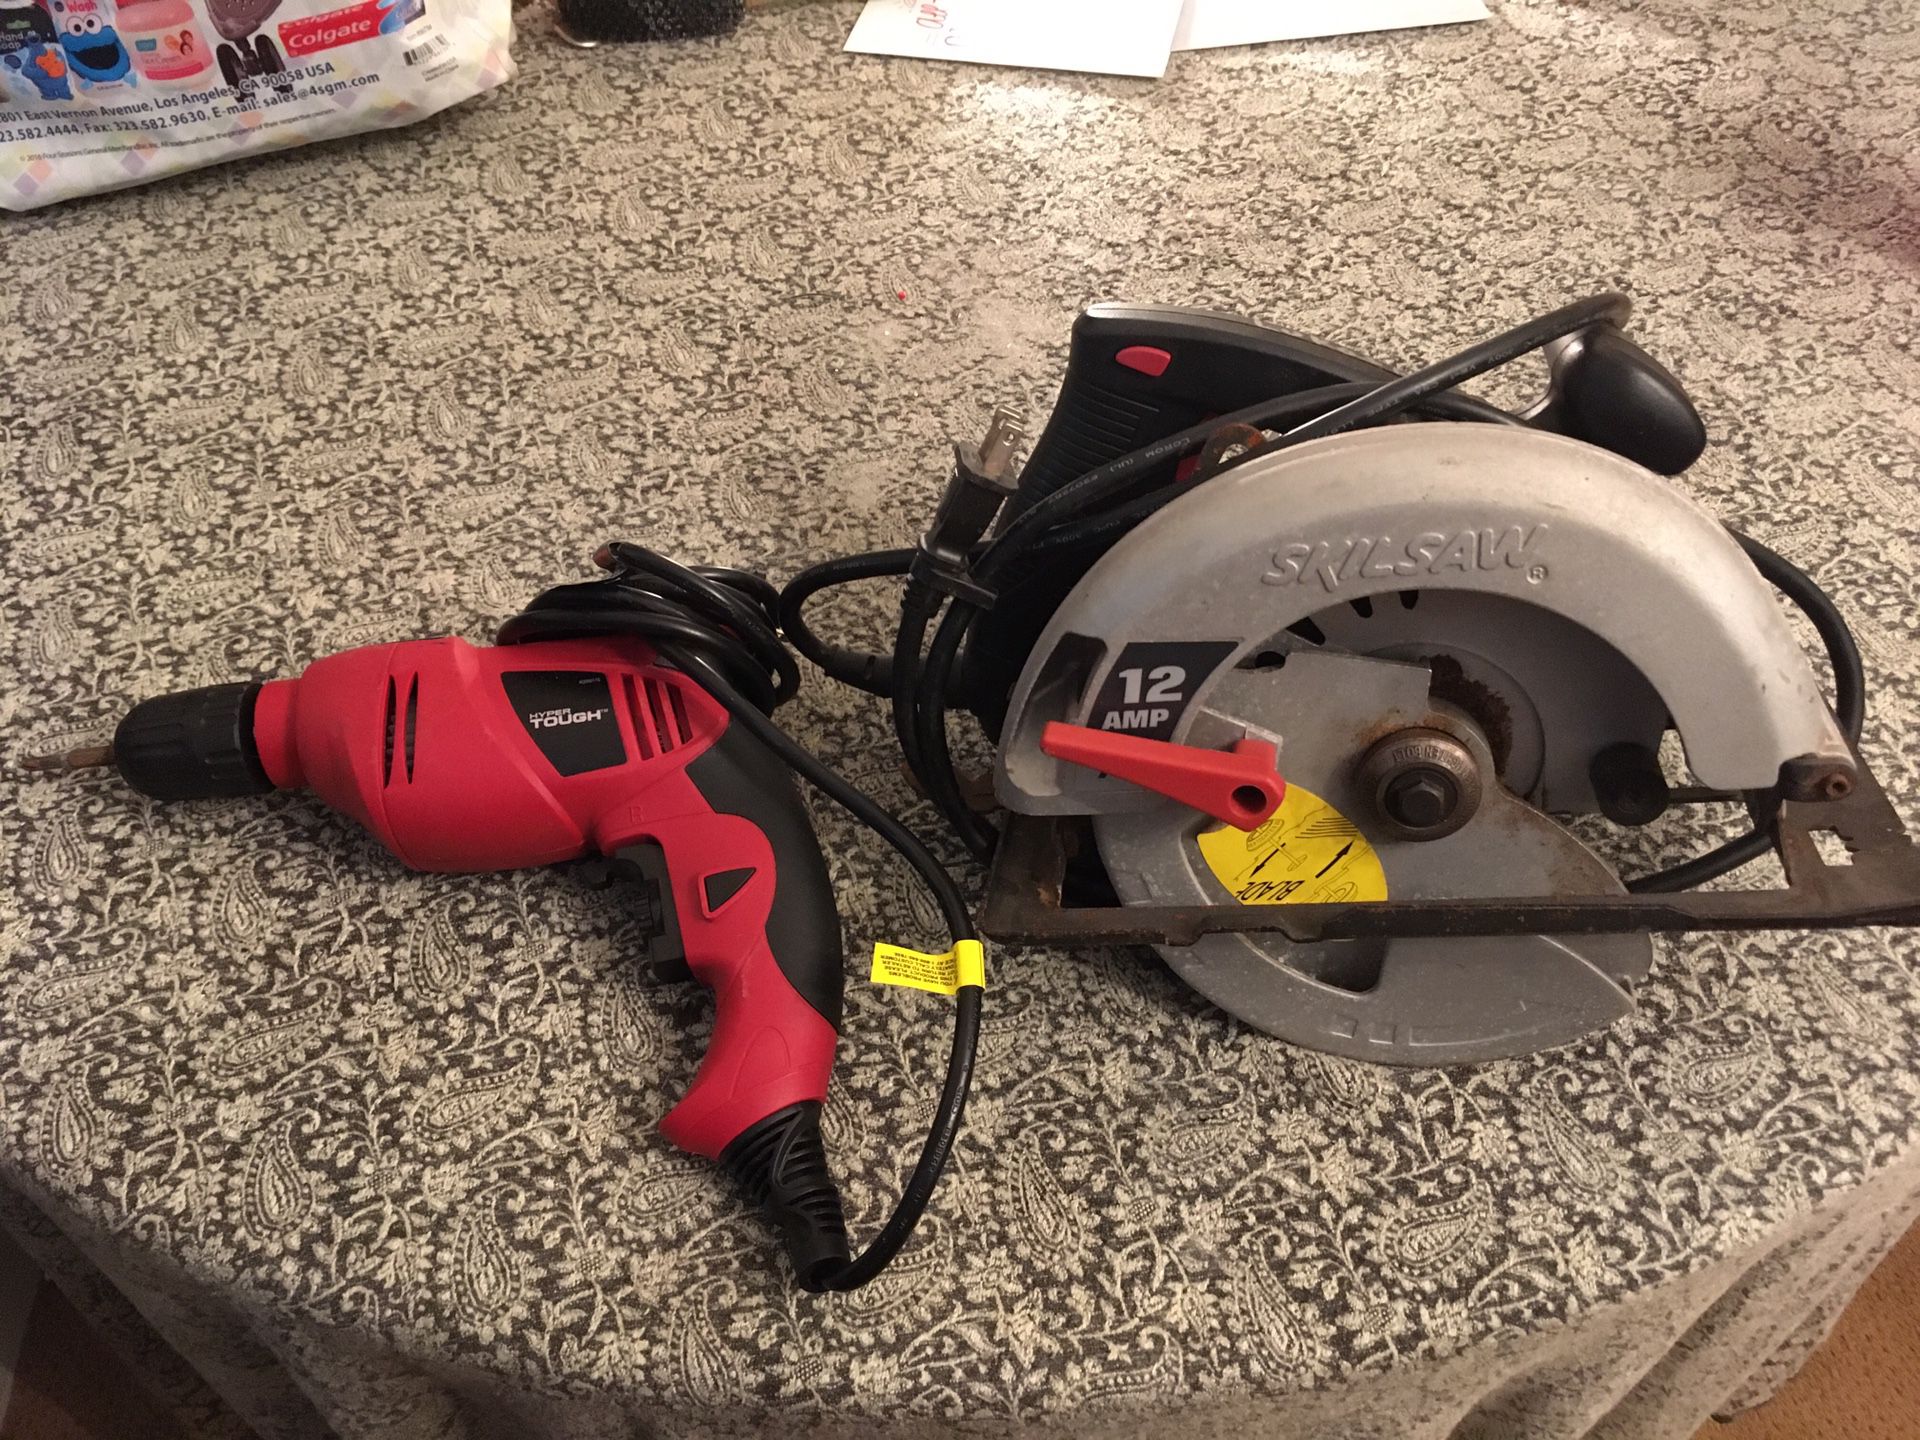 12 amp skilsaw and hyper touch power drill